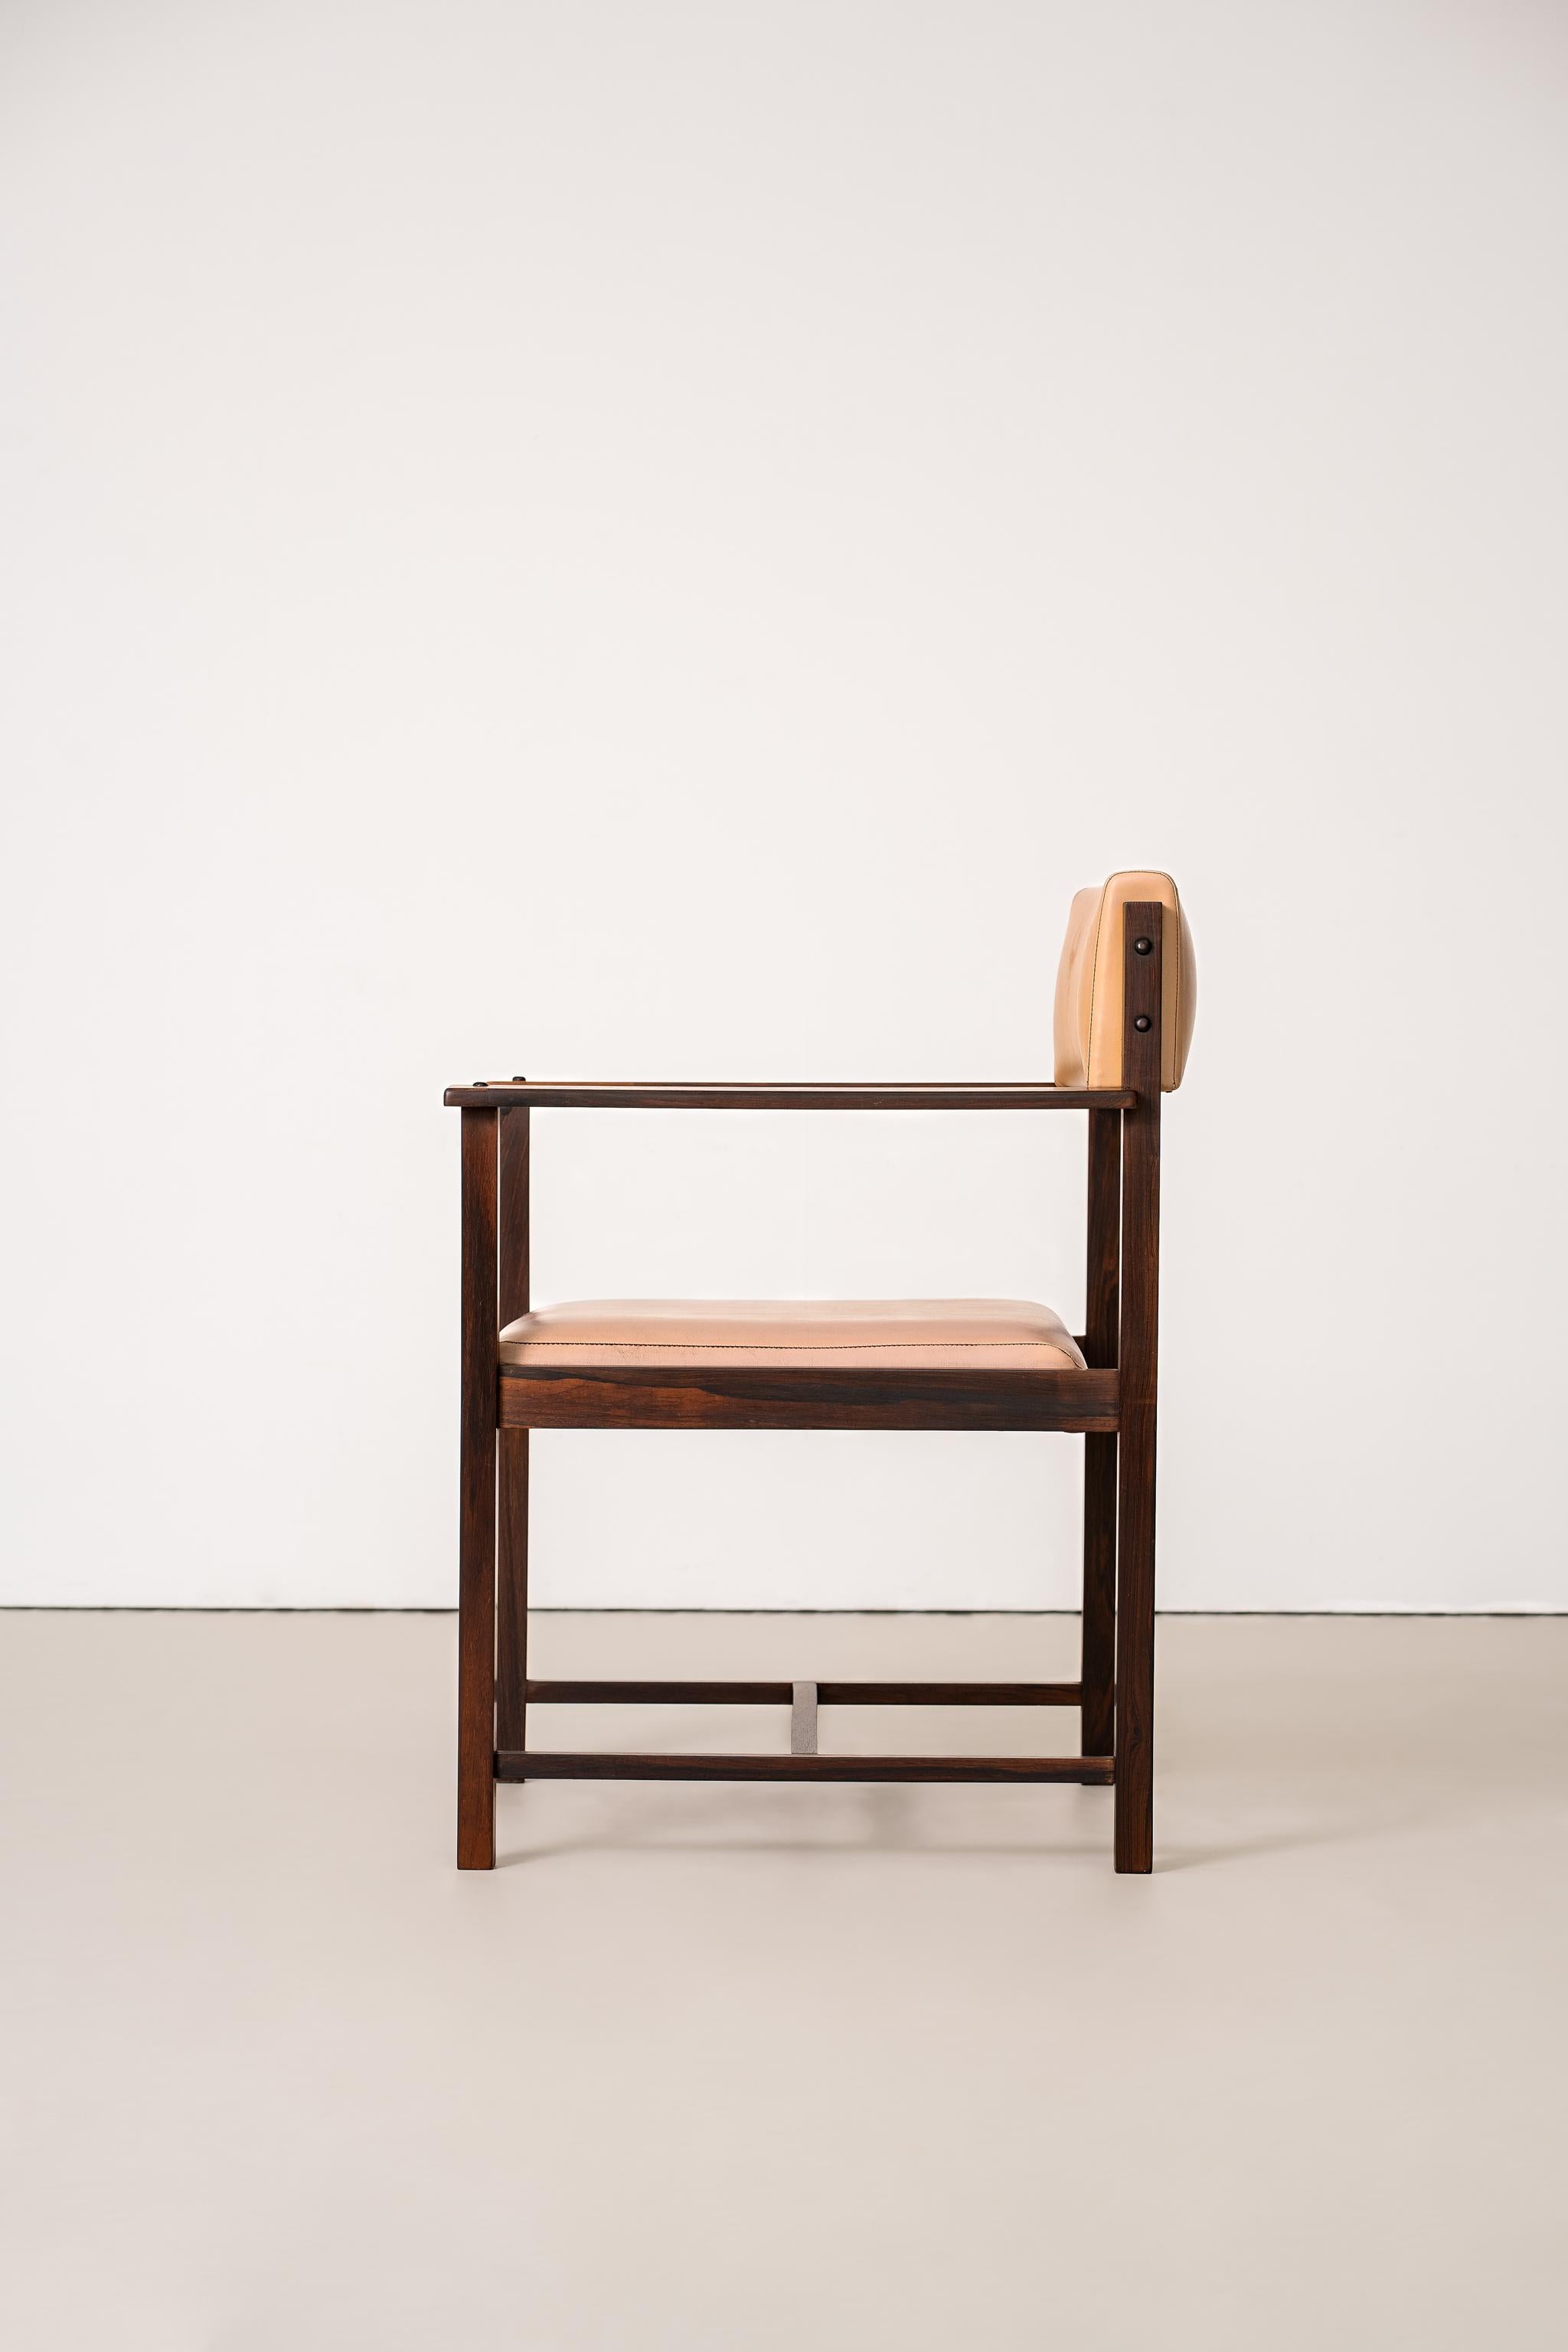 Woodwork Brazilian Mid-Century Modern Armchair in Rosewood by Tora Arquitetura, c. 1970 For Sale